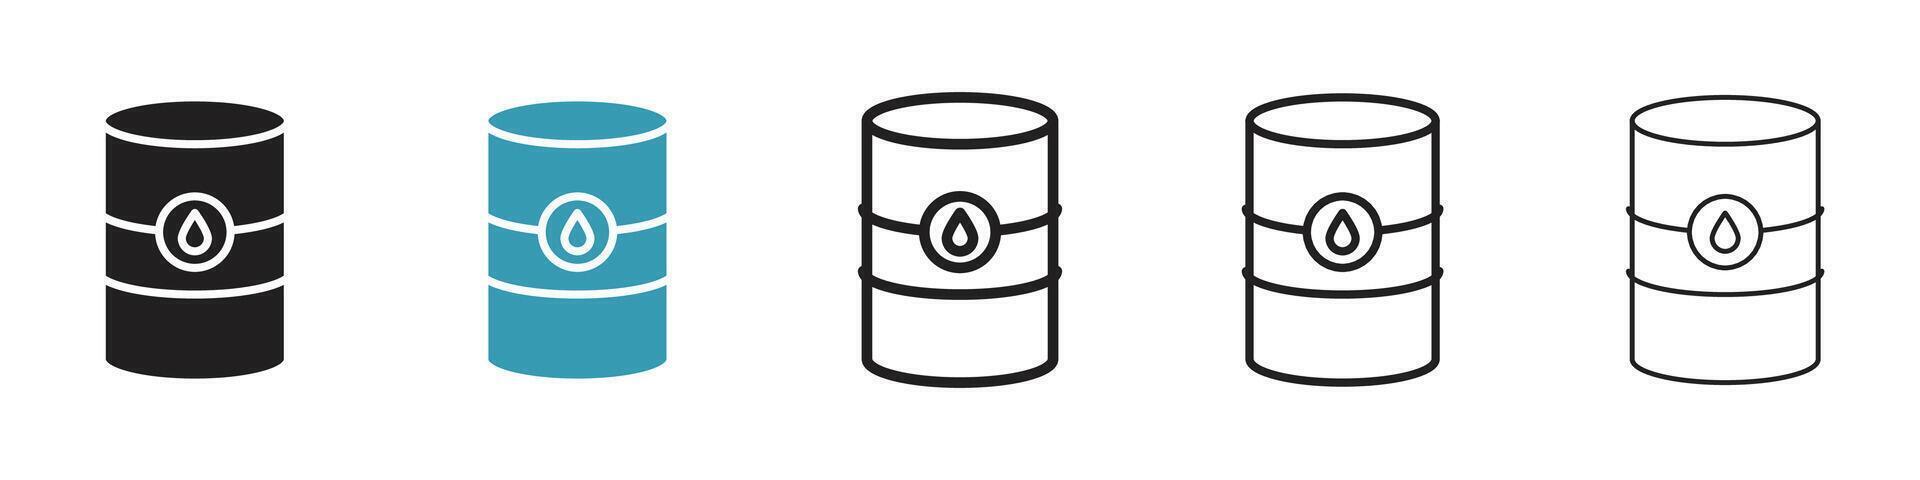 combustible barril icono vector